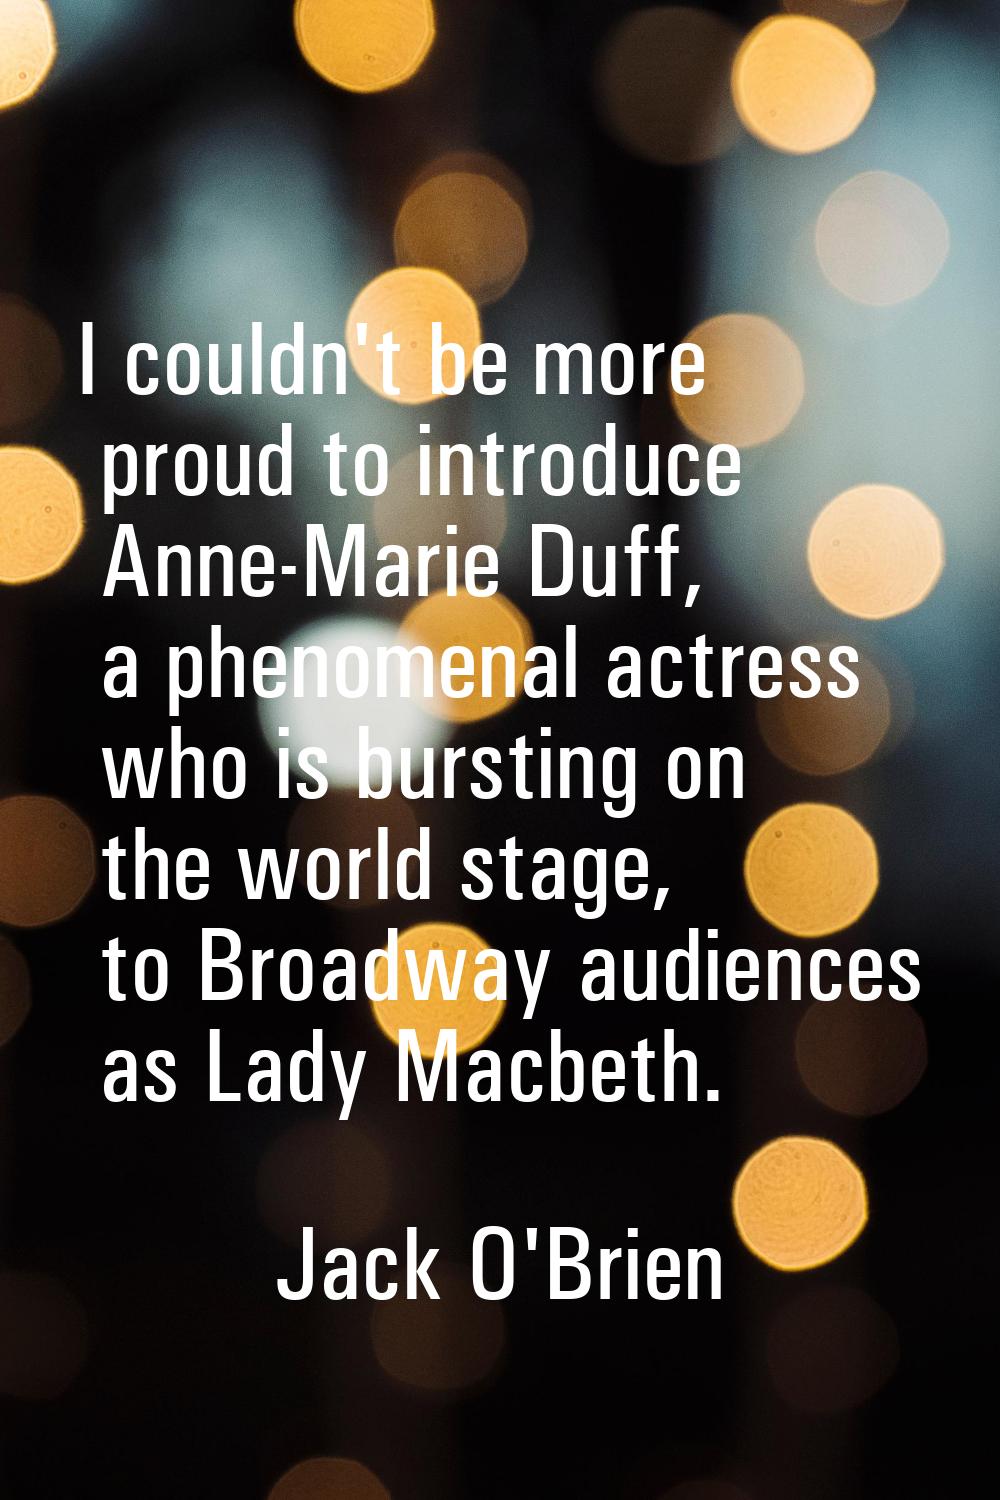 I couldn't be more proud to introduce Anne-Marie Duff, a phenomenal actress who is bursting on the 